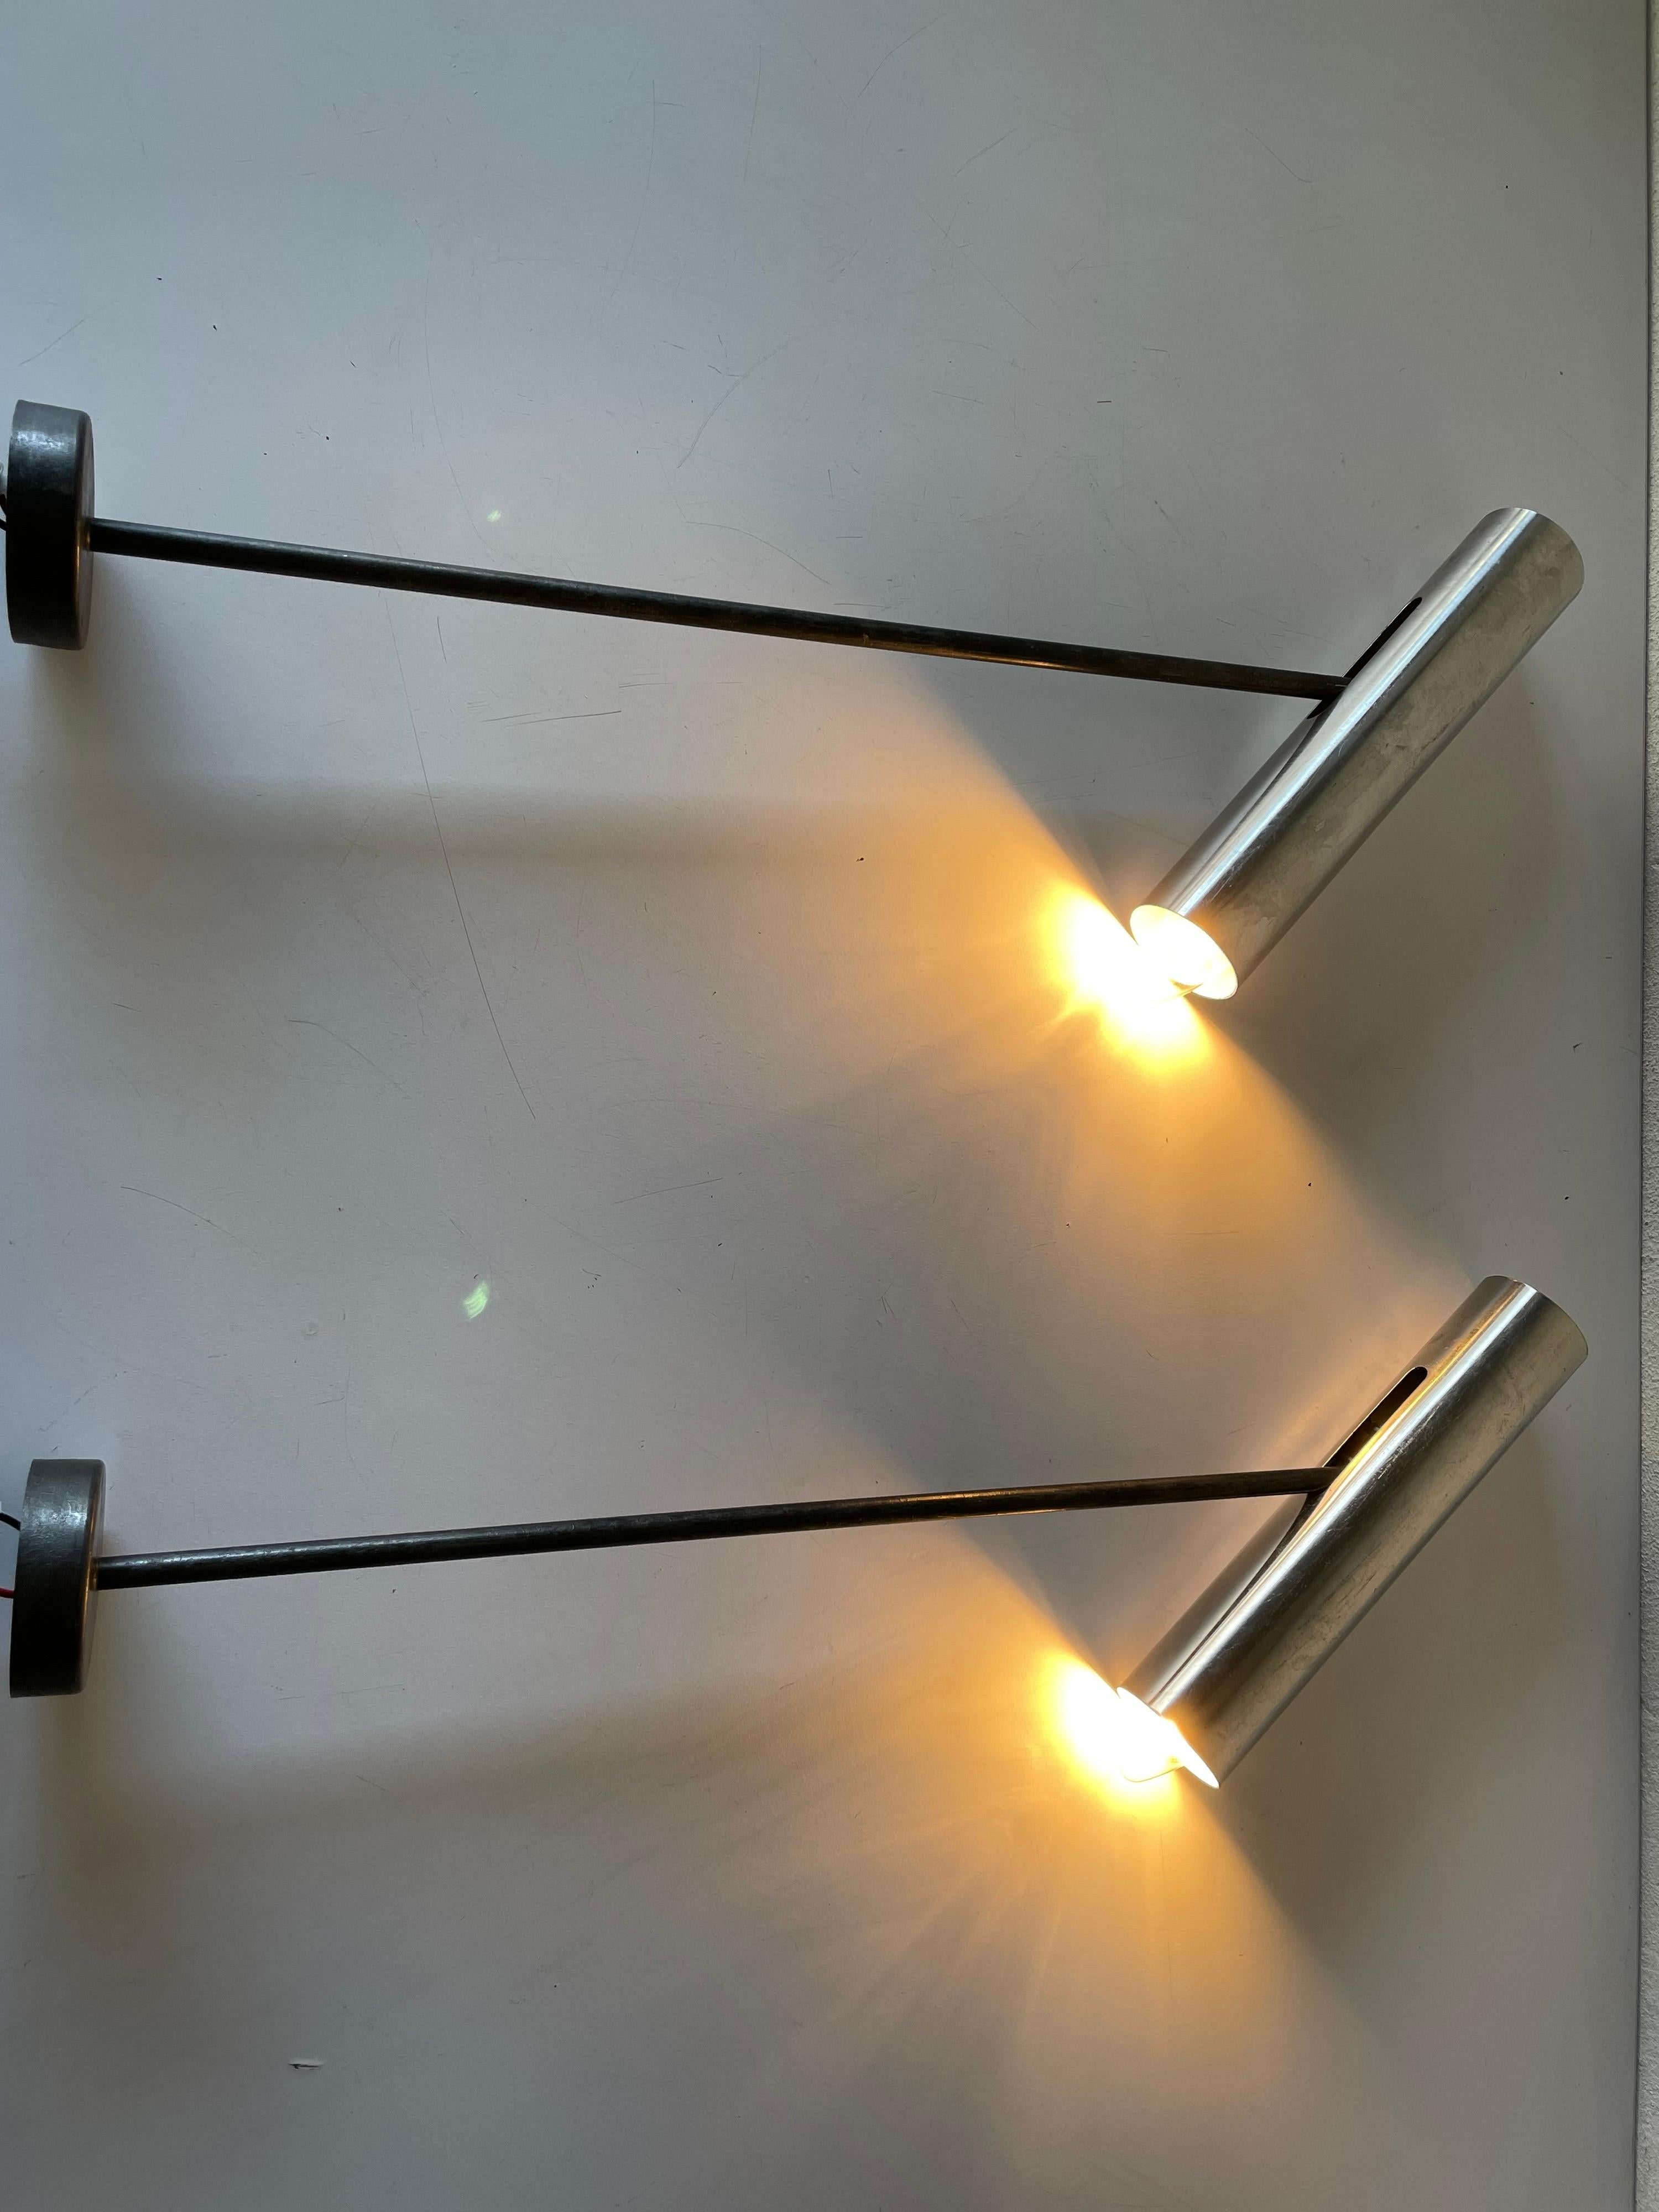 Pair of Adjustable Ceiling Spots or Wall Lamps, 1950s, France For Sale 6